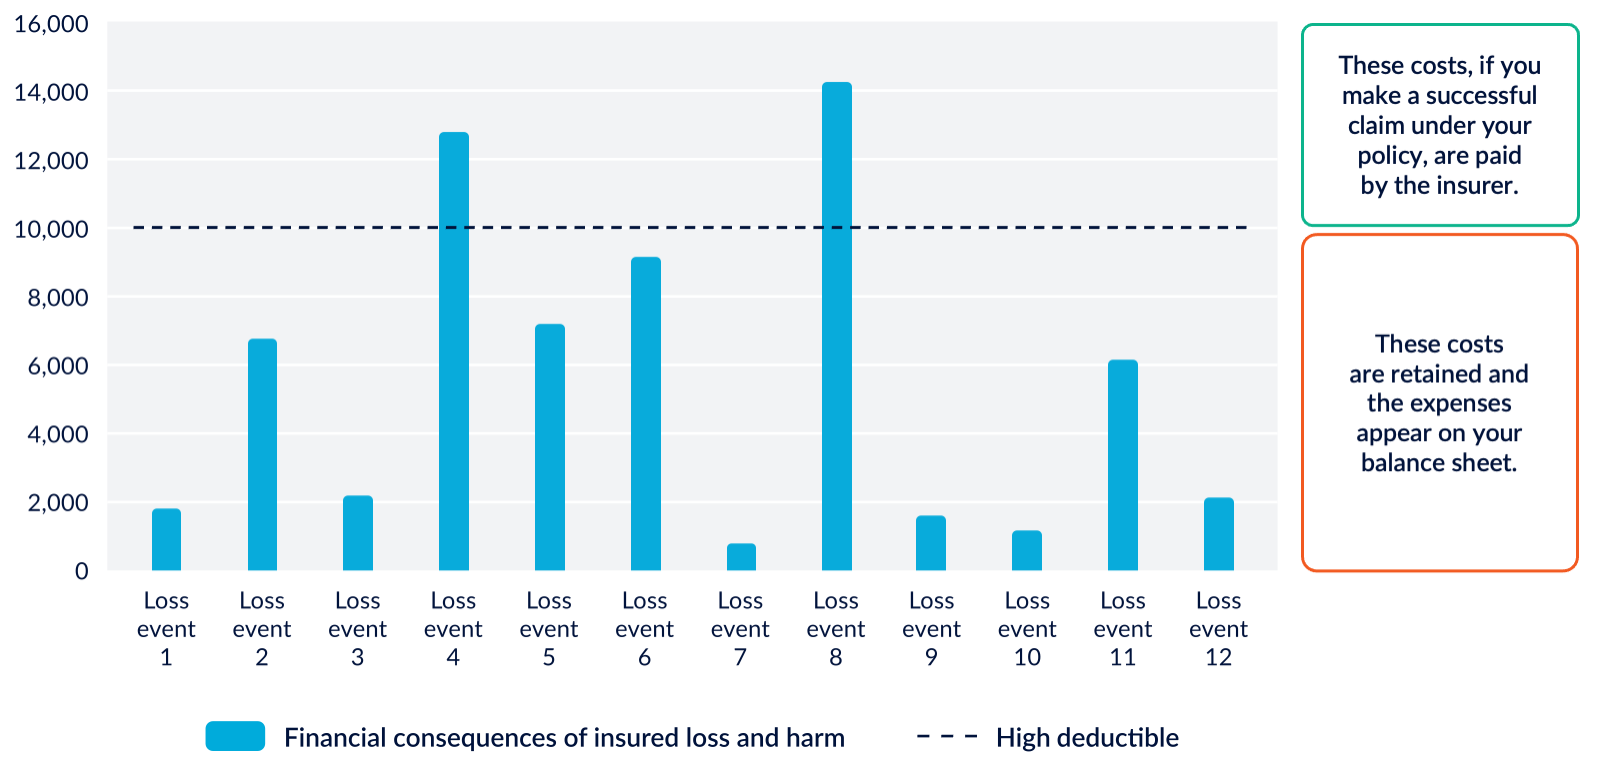 An example of the financial consequences of insured loss and harm and high deductible. 